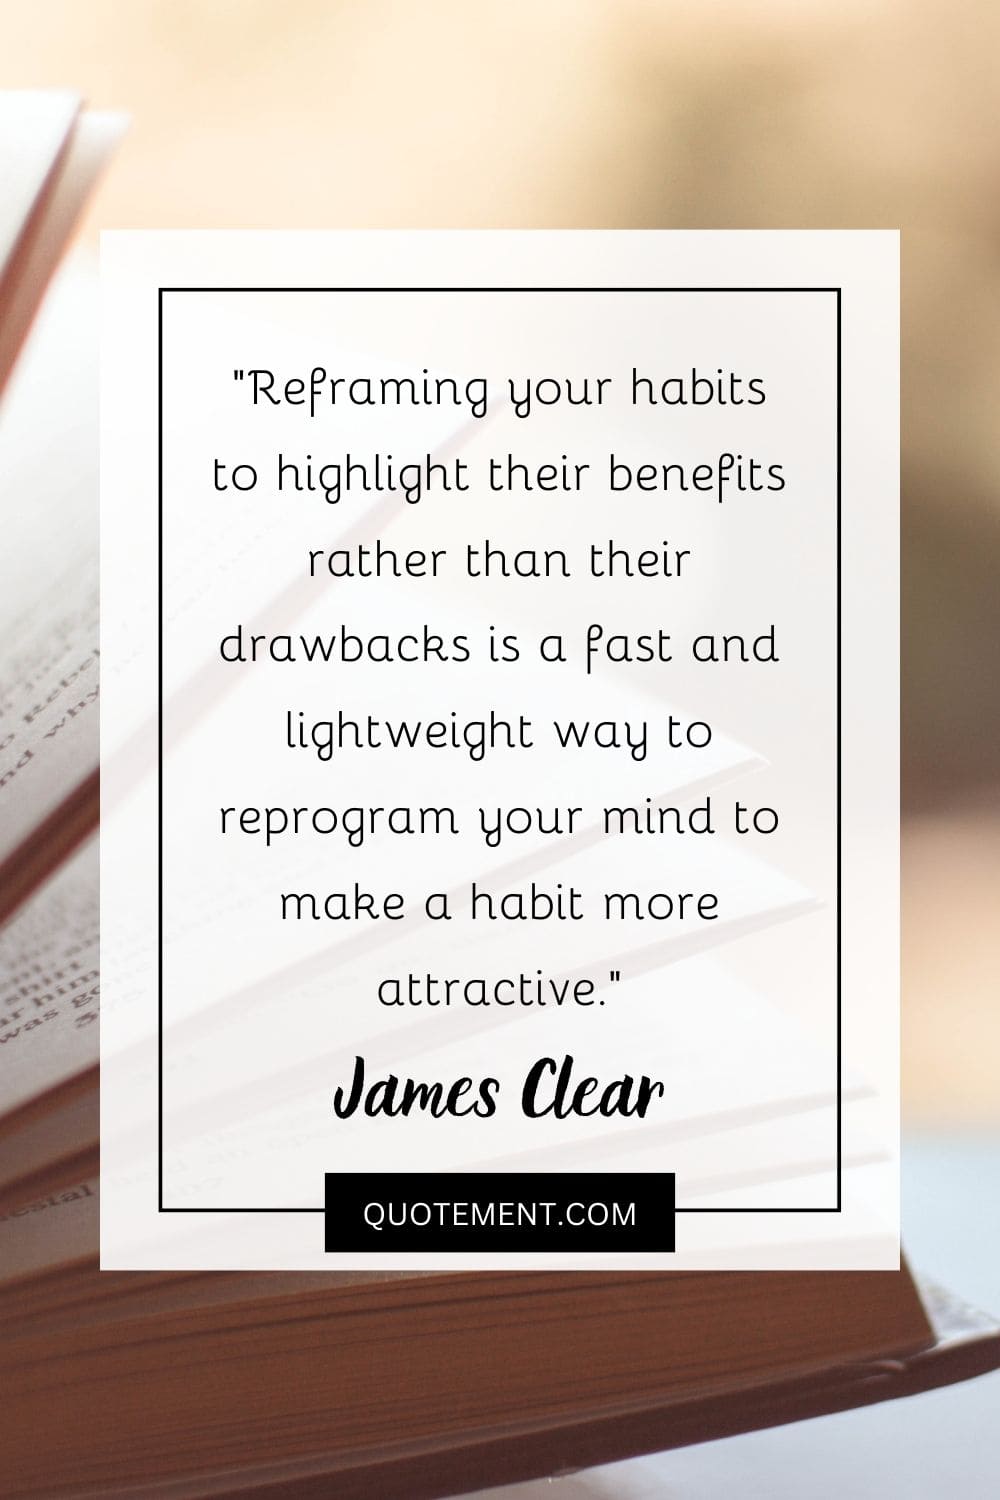 Reframing your habits to highlight their benefits rather than their drawbacks